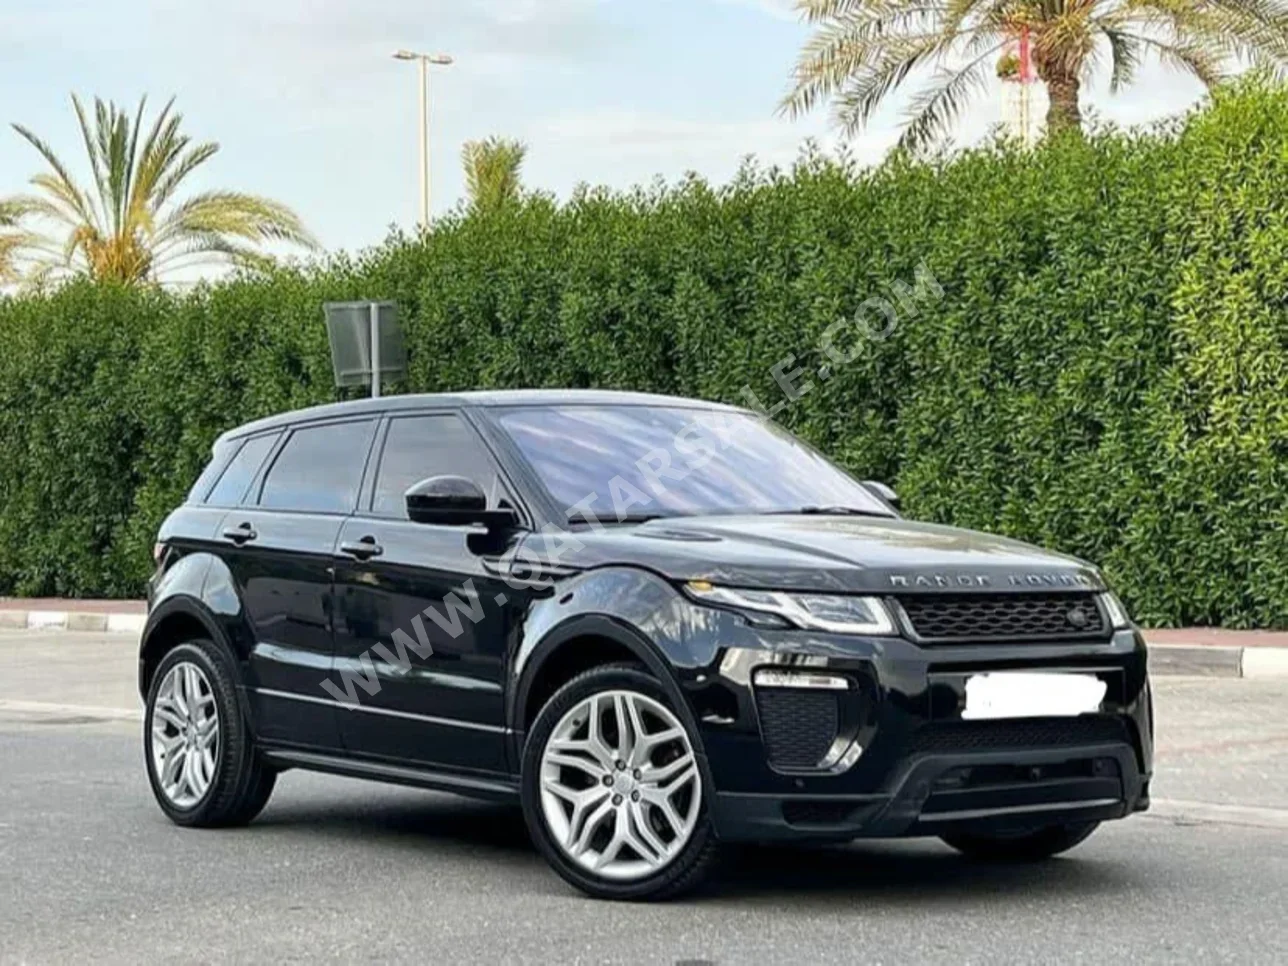 Land Rover  Evoque  Dynamic  2016  Automatic  29,000 Km  4 Cylinder  Four Wheel Drive (4WD)  SUV  Black